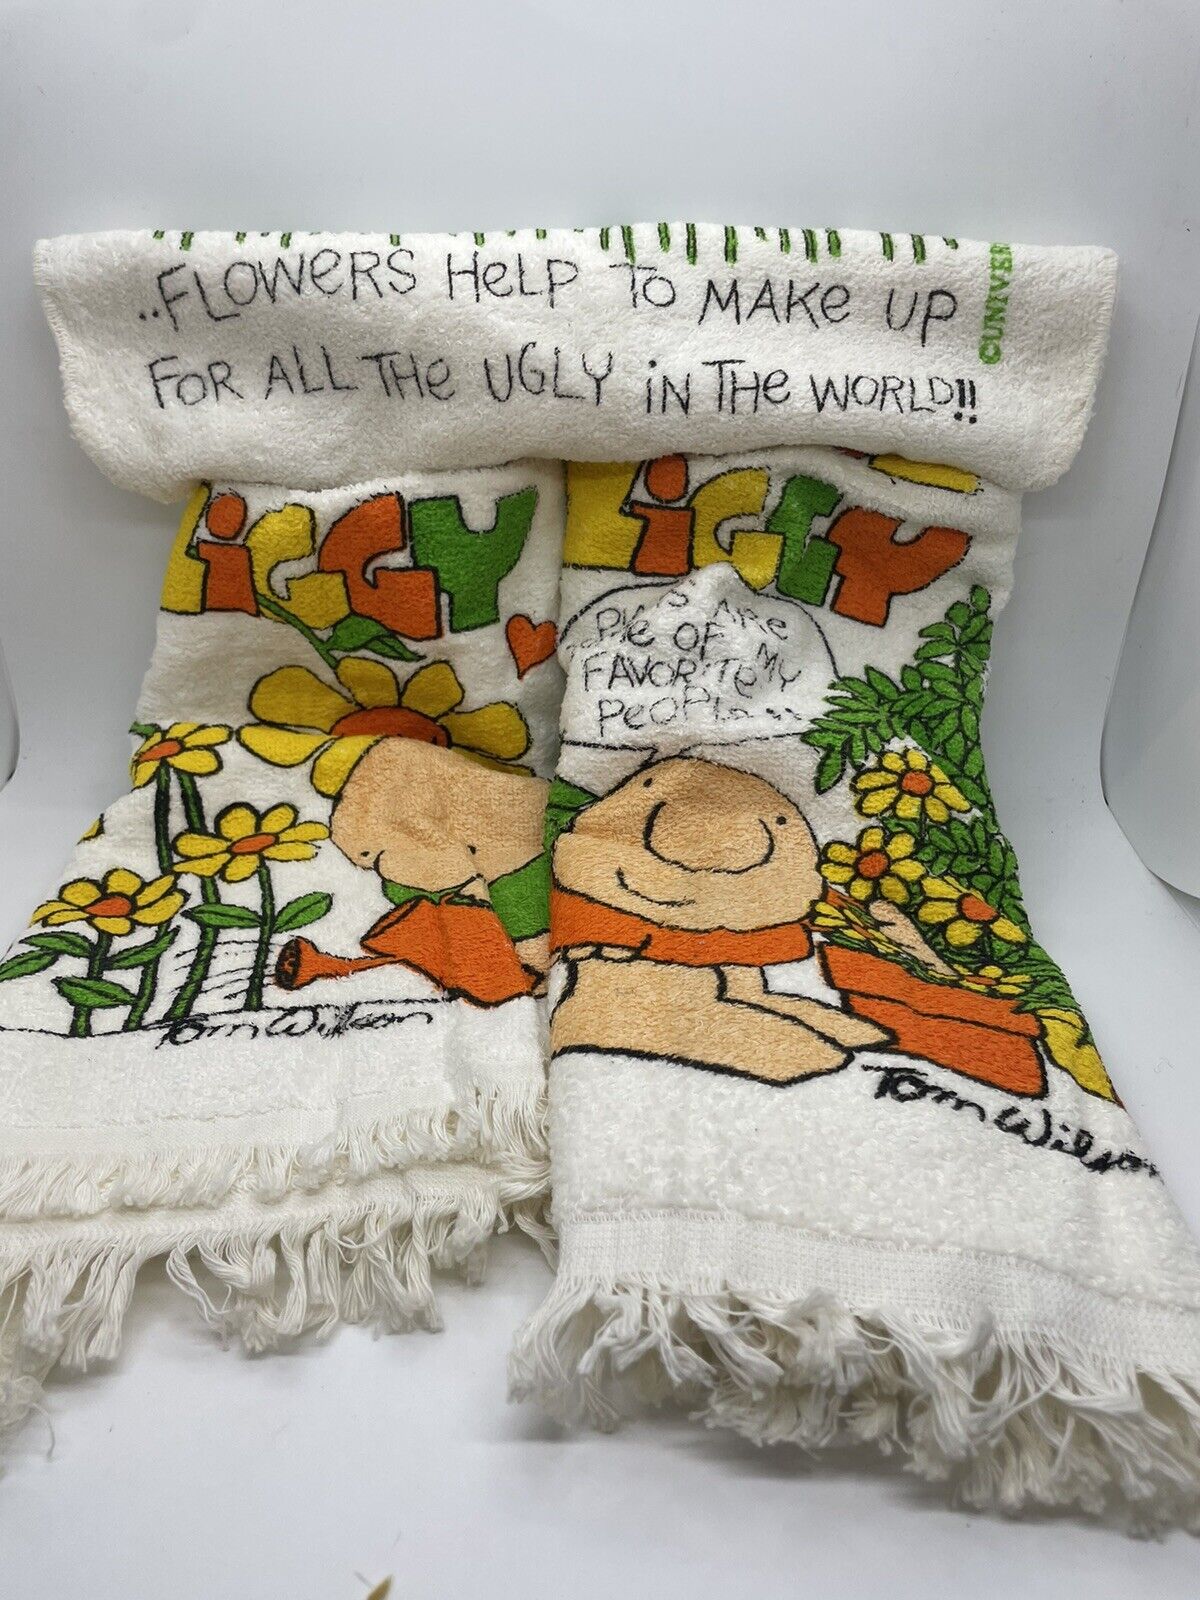 Vintage Set Of Cannon “Ziggy” Washcloth & 2 Hand towels. “Plants Are Favorite”